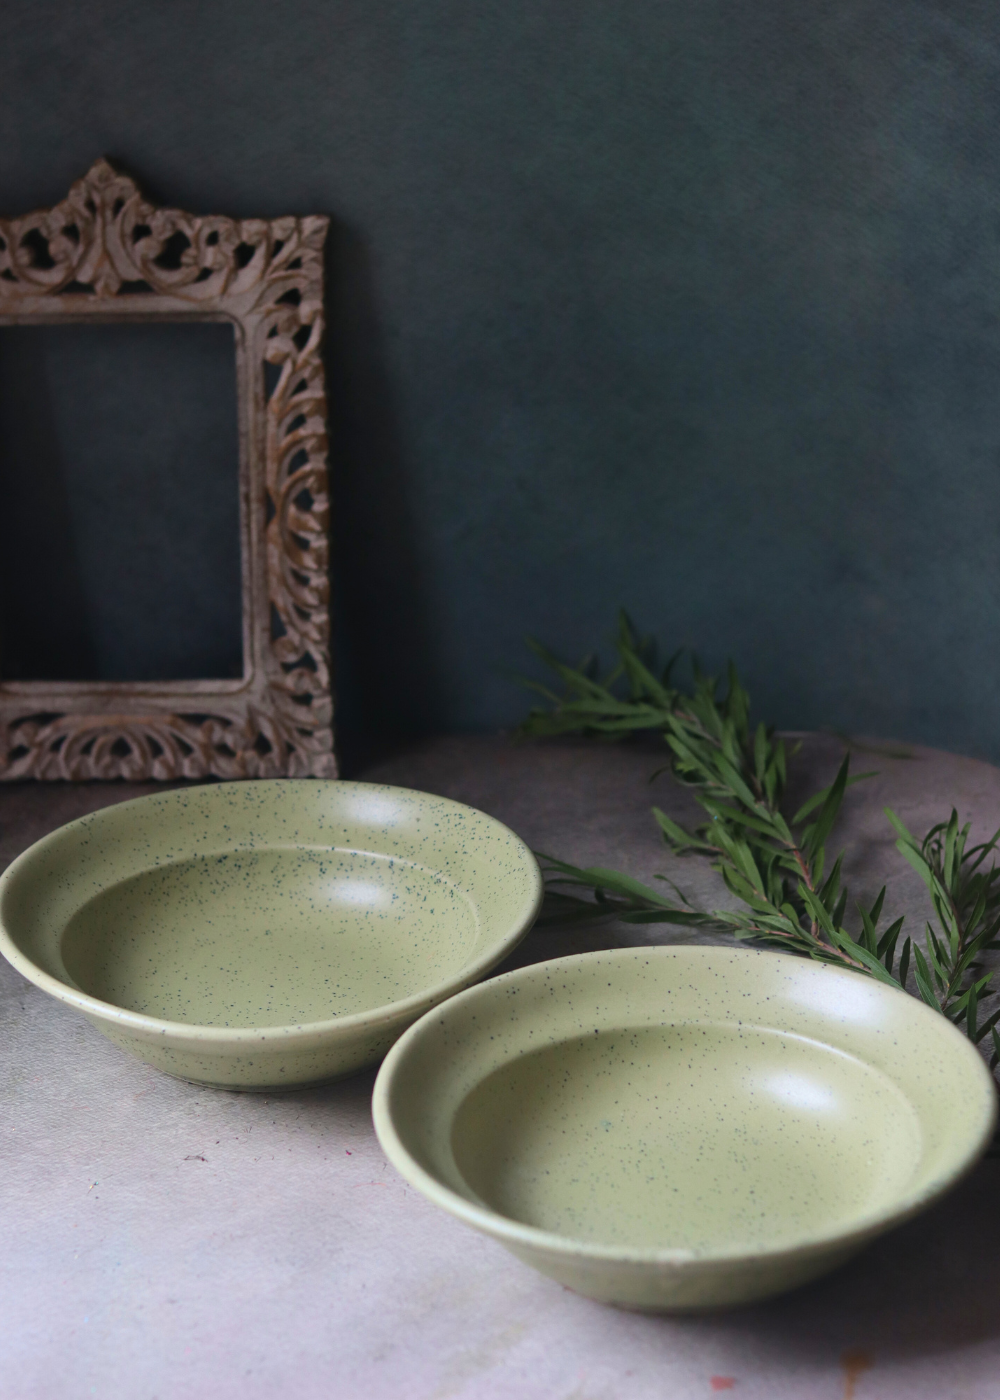 Handmade ceramic two pasta plates army green color